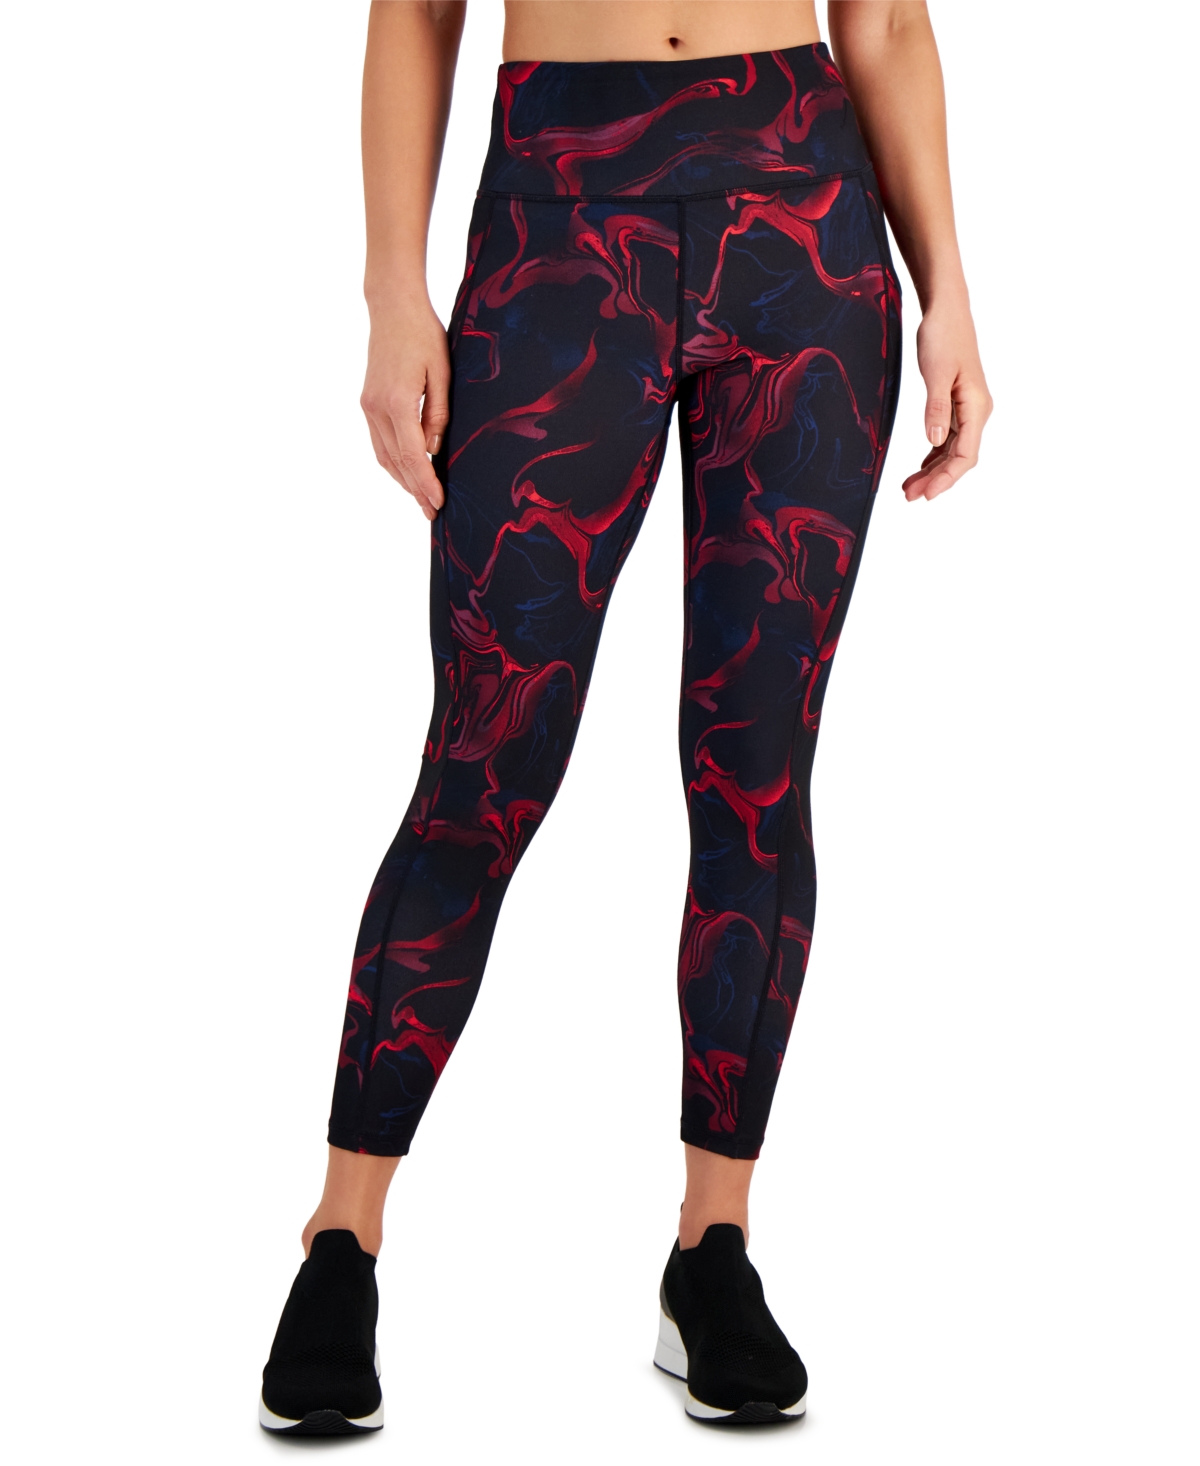 Women's Printed Compression 7/8 Leggings, Created for Macy's - Wine Marble